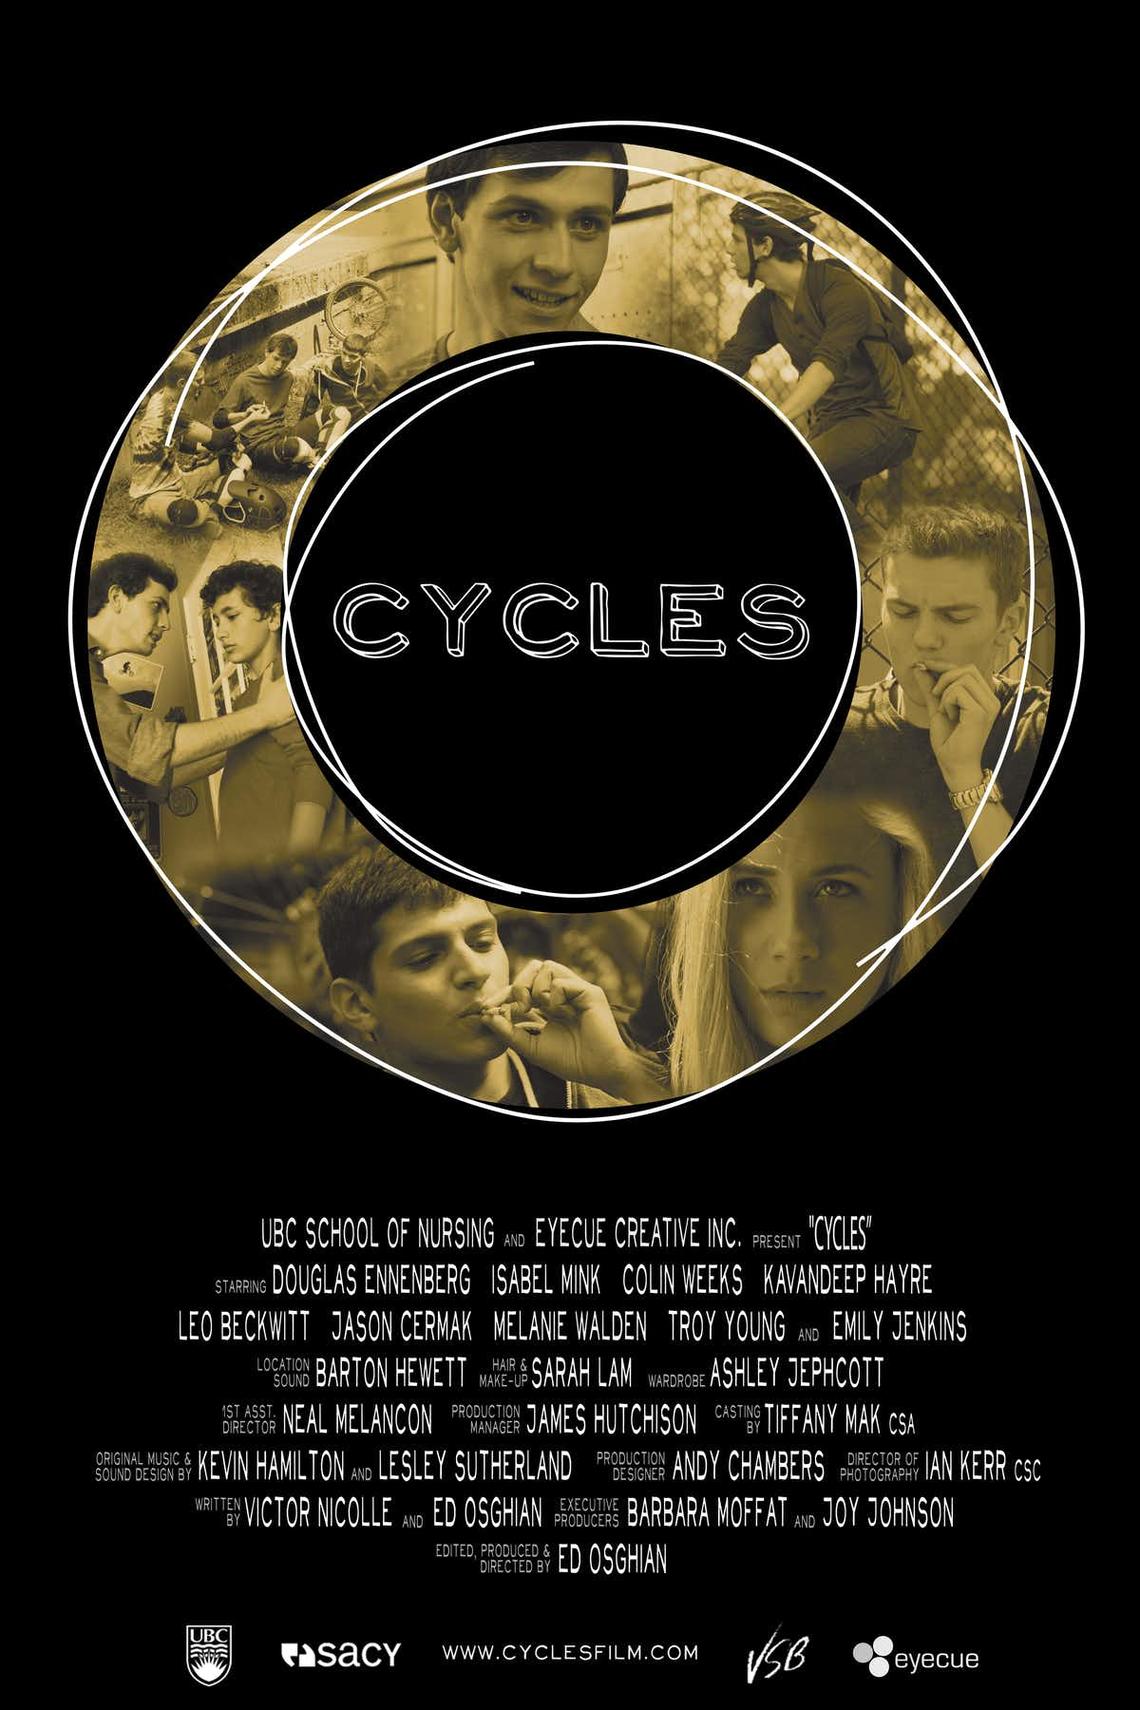 CYCLES was a film produced from research on youth to educate young people about cannabis.